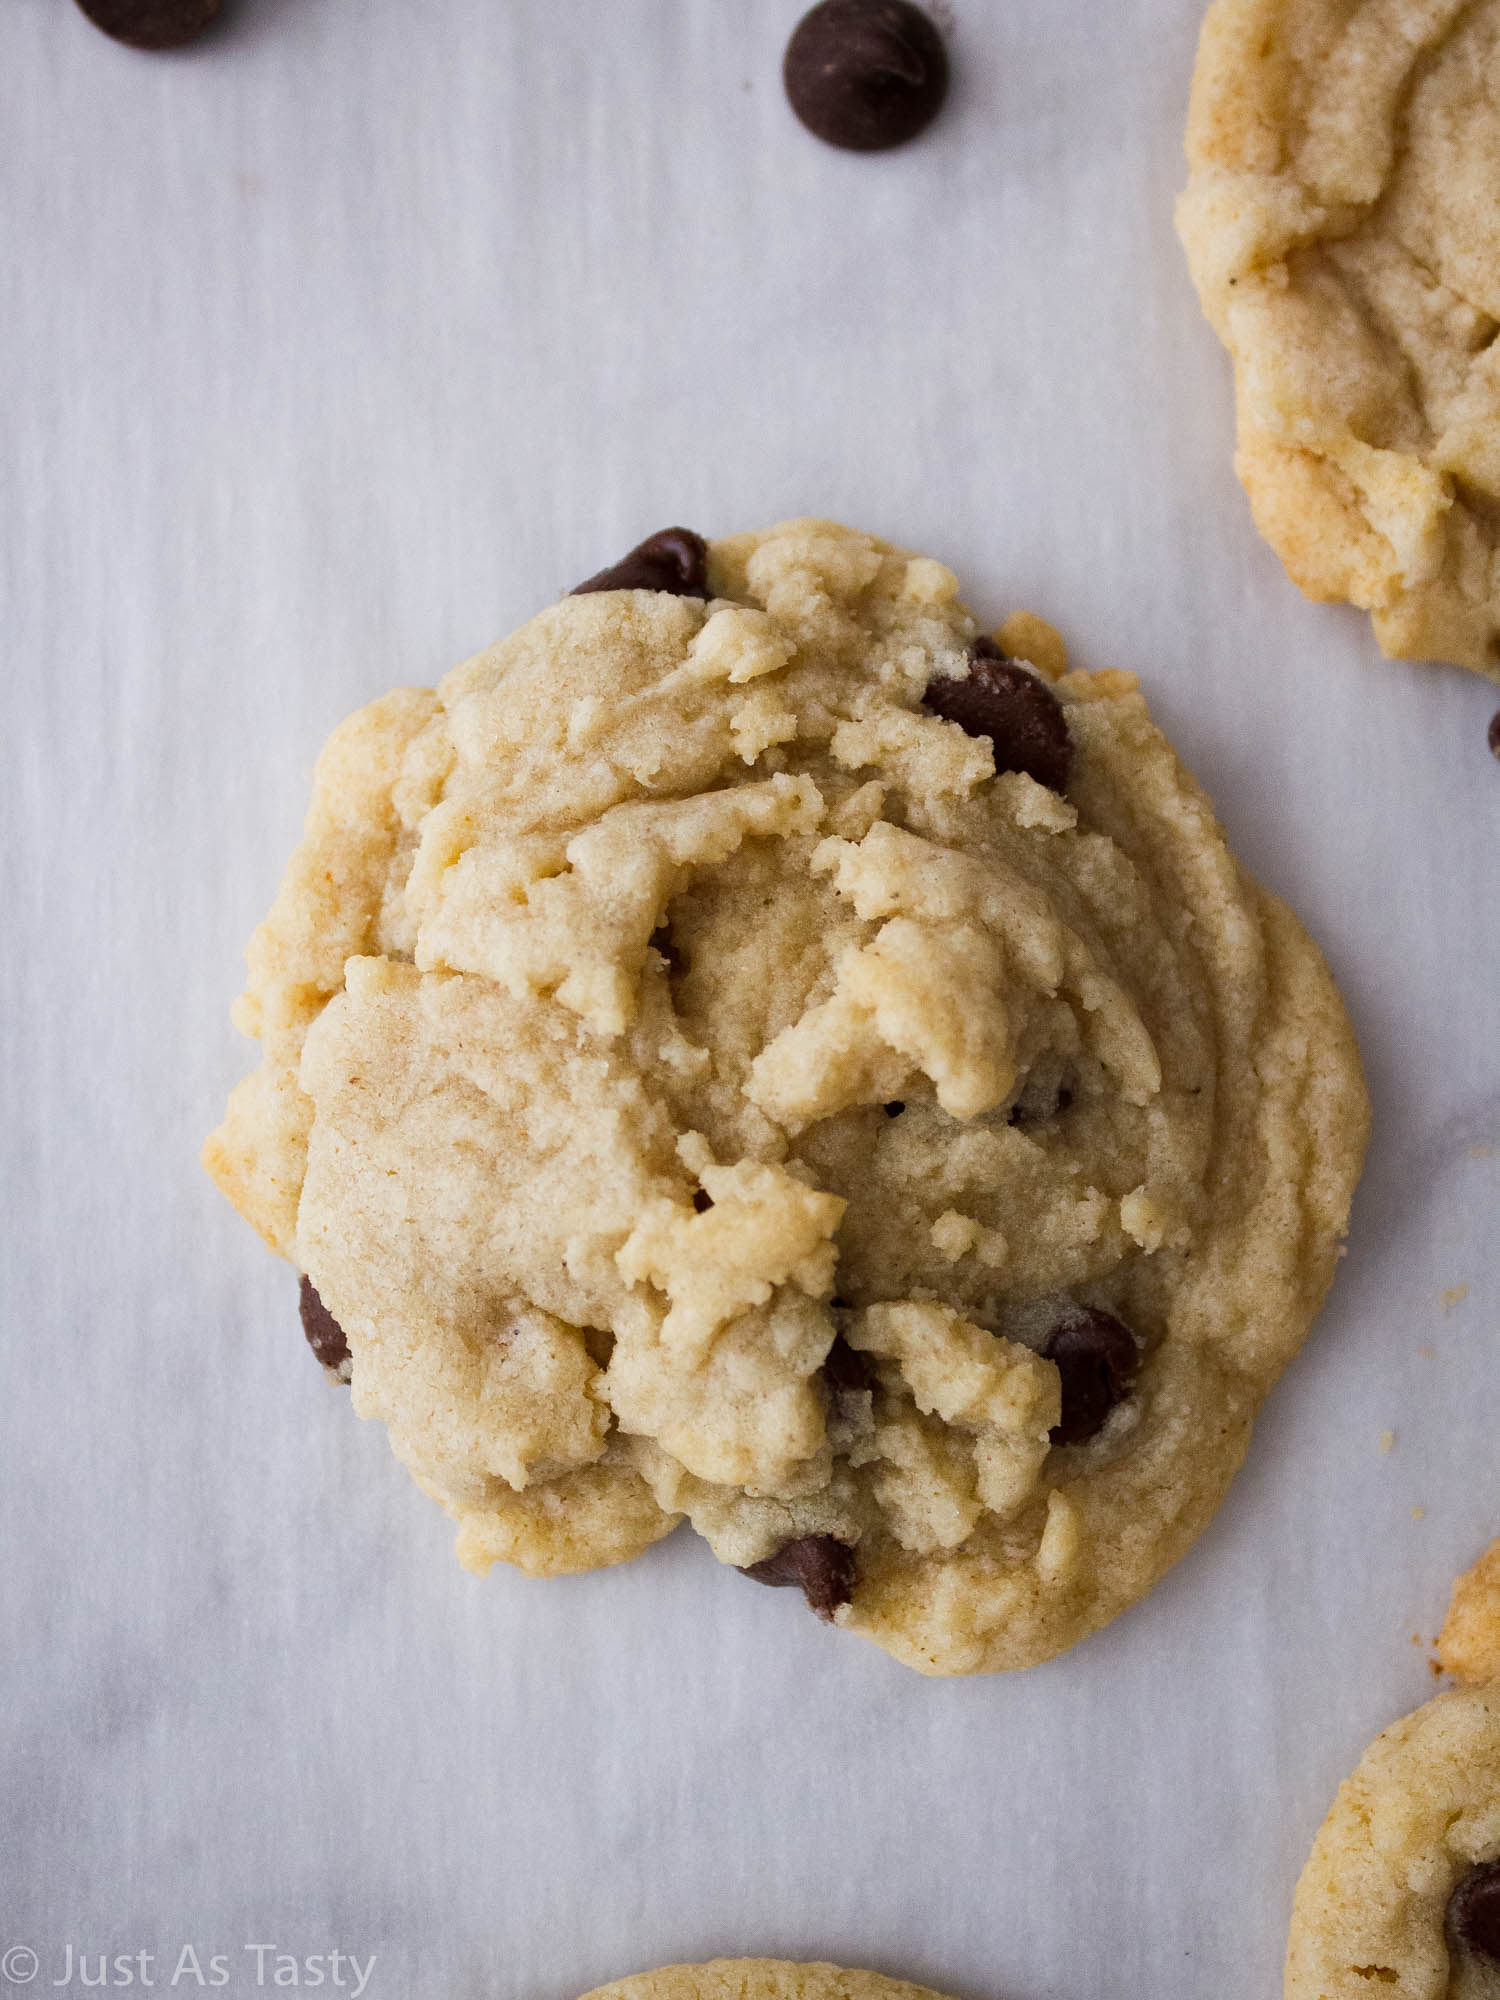 Close-up of a chocolate chip cookie.